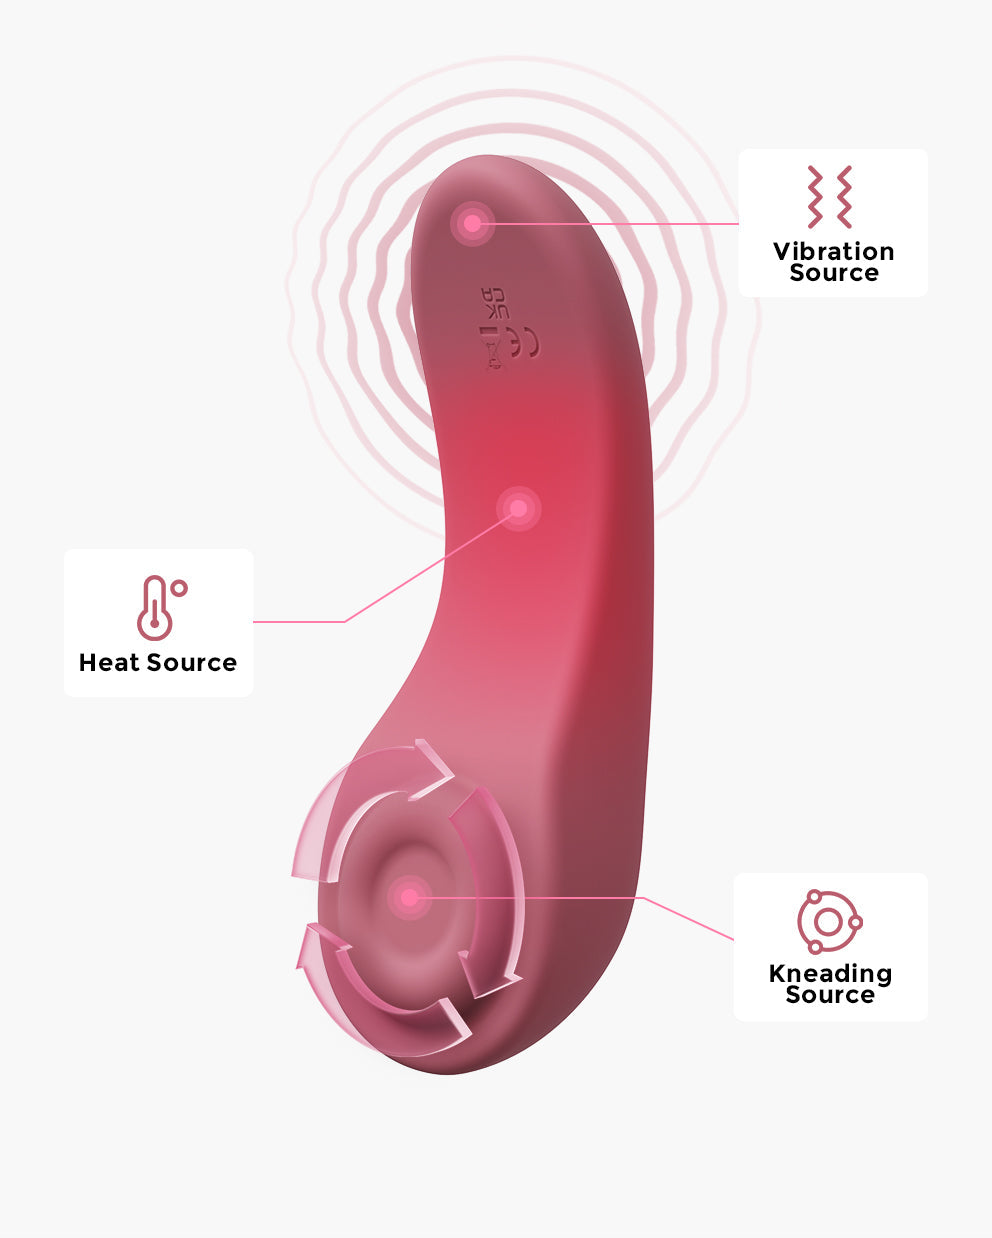 Momcozy Kneading Lactation Massager, 3-in-1 +Heat! WORTH IT? 